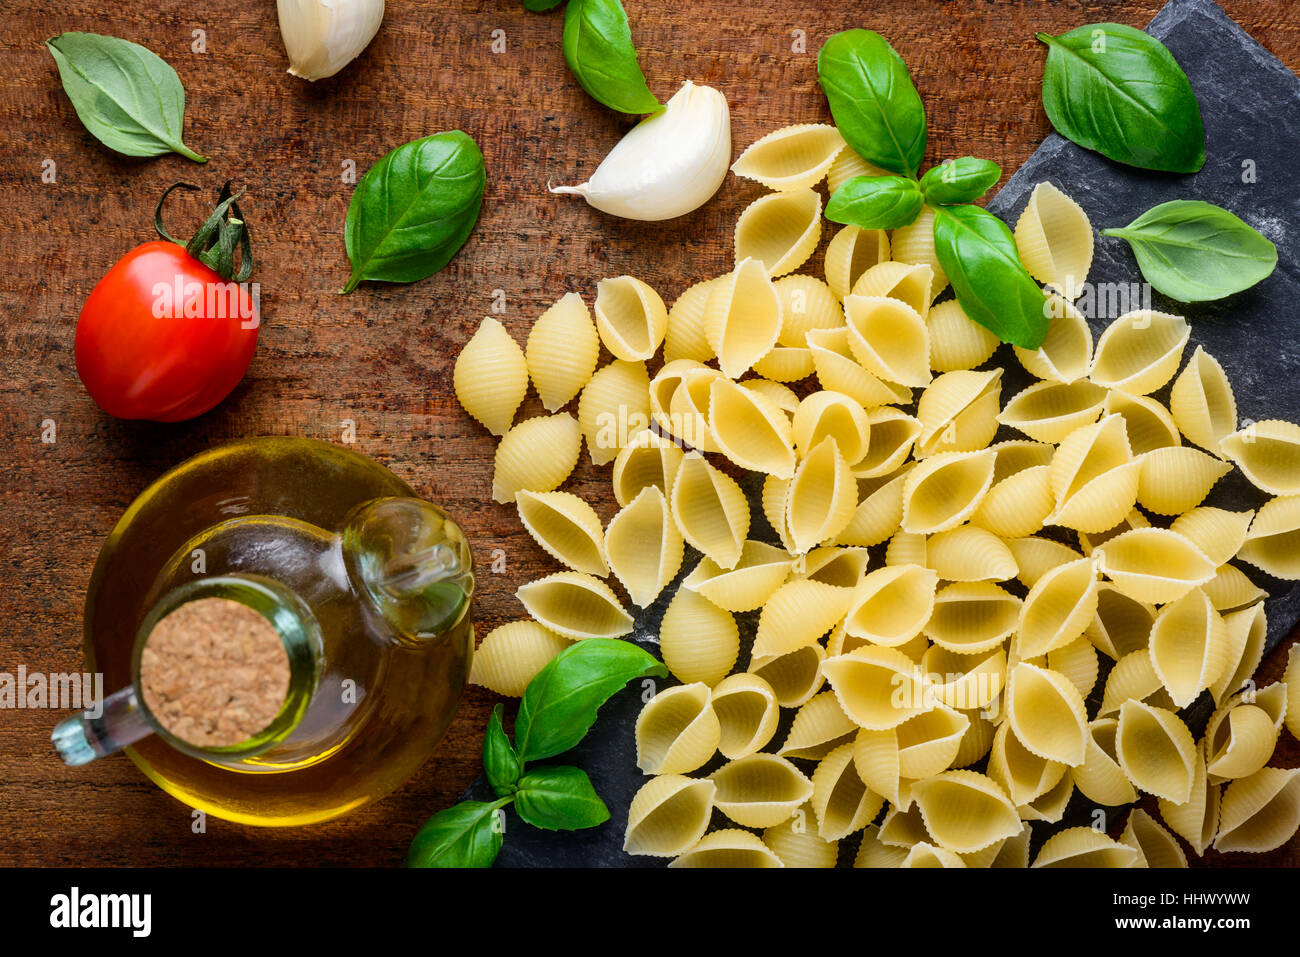 Yellow Conchiglie Rigate Pasta with cooking ingredients, basil, tomato and olive oil seasoning Stock Photo